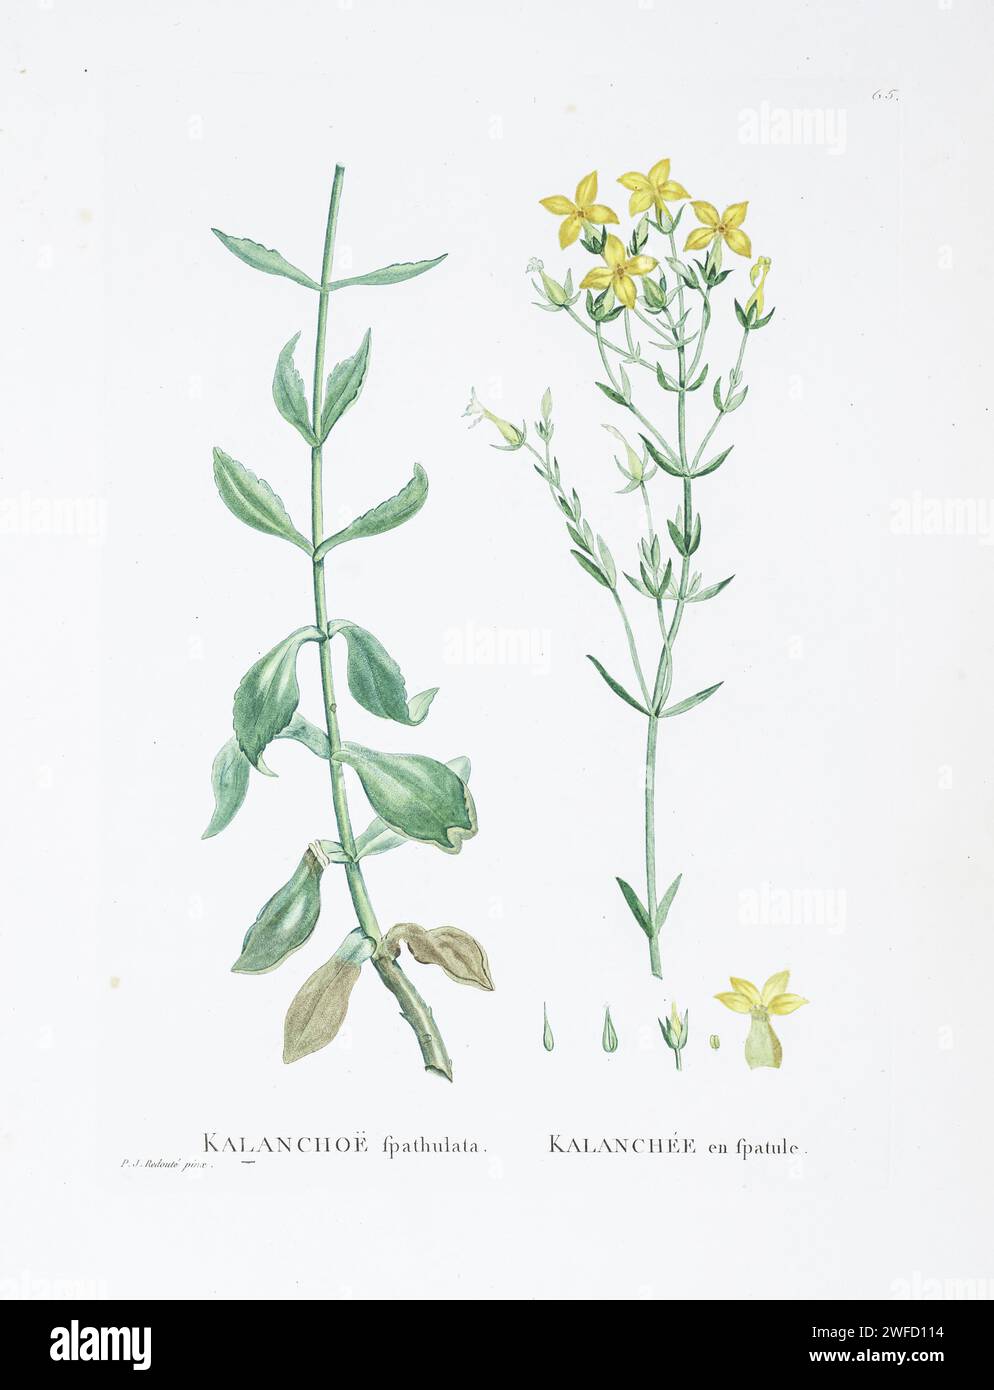 Kalanchoe spathulatat from History of Succulent Plants [Plantarum historia succulentarum / Histoire des plantes grasses] painted by Pierre-Joseph Redouté and described by Augustin Pyramus de Candolle 1799 Stock Photo